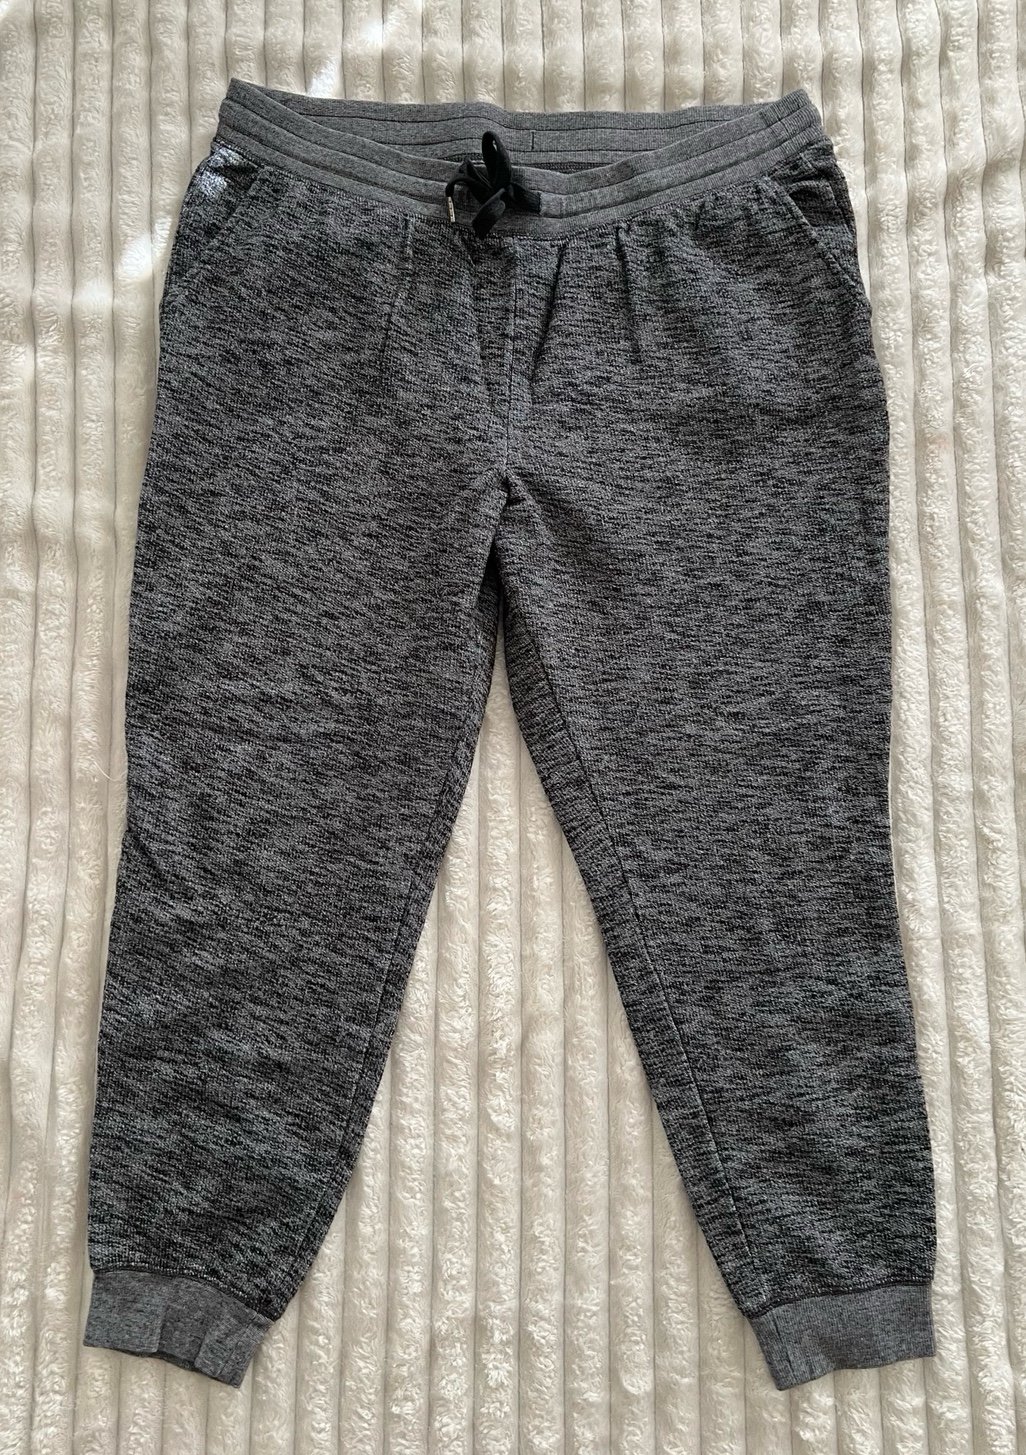 Buy Women’s Old Navy, joggers size extra large LIVXw5n2